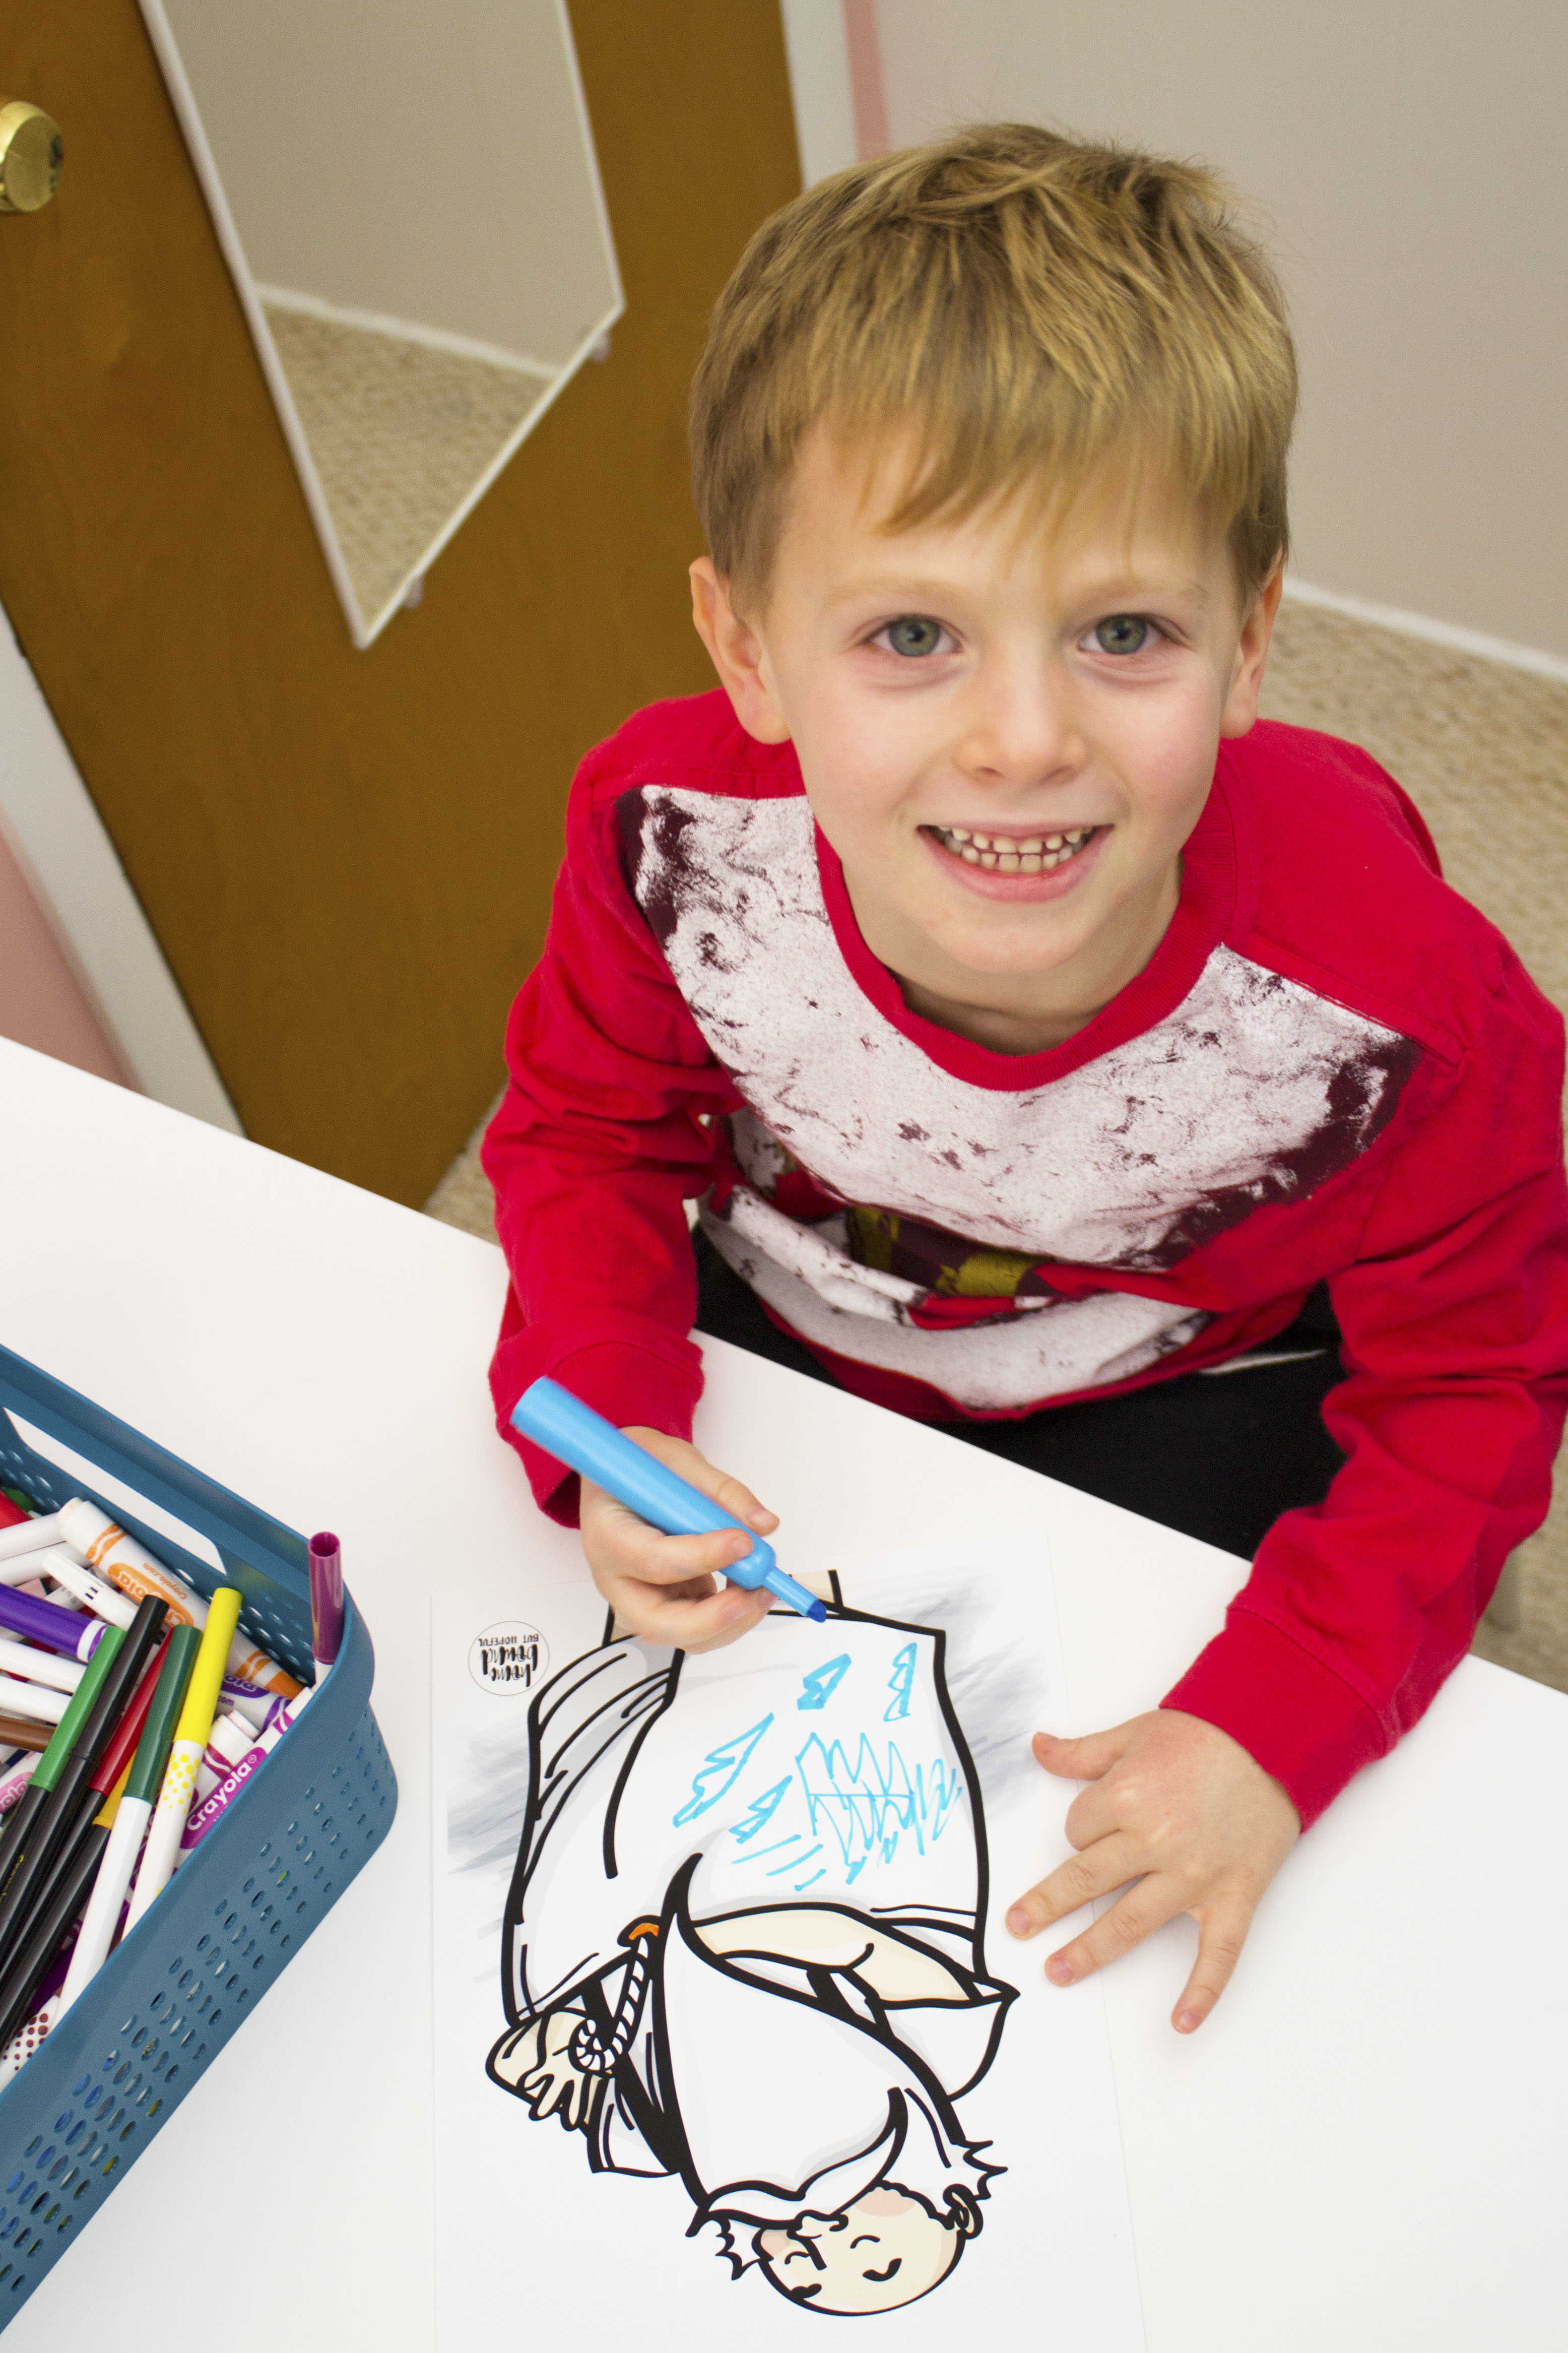 BOY USING MARKER FOR CRAFT